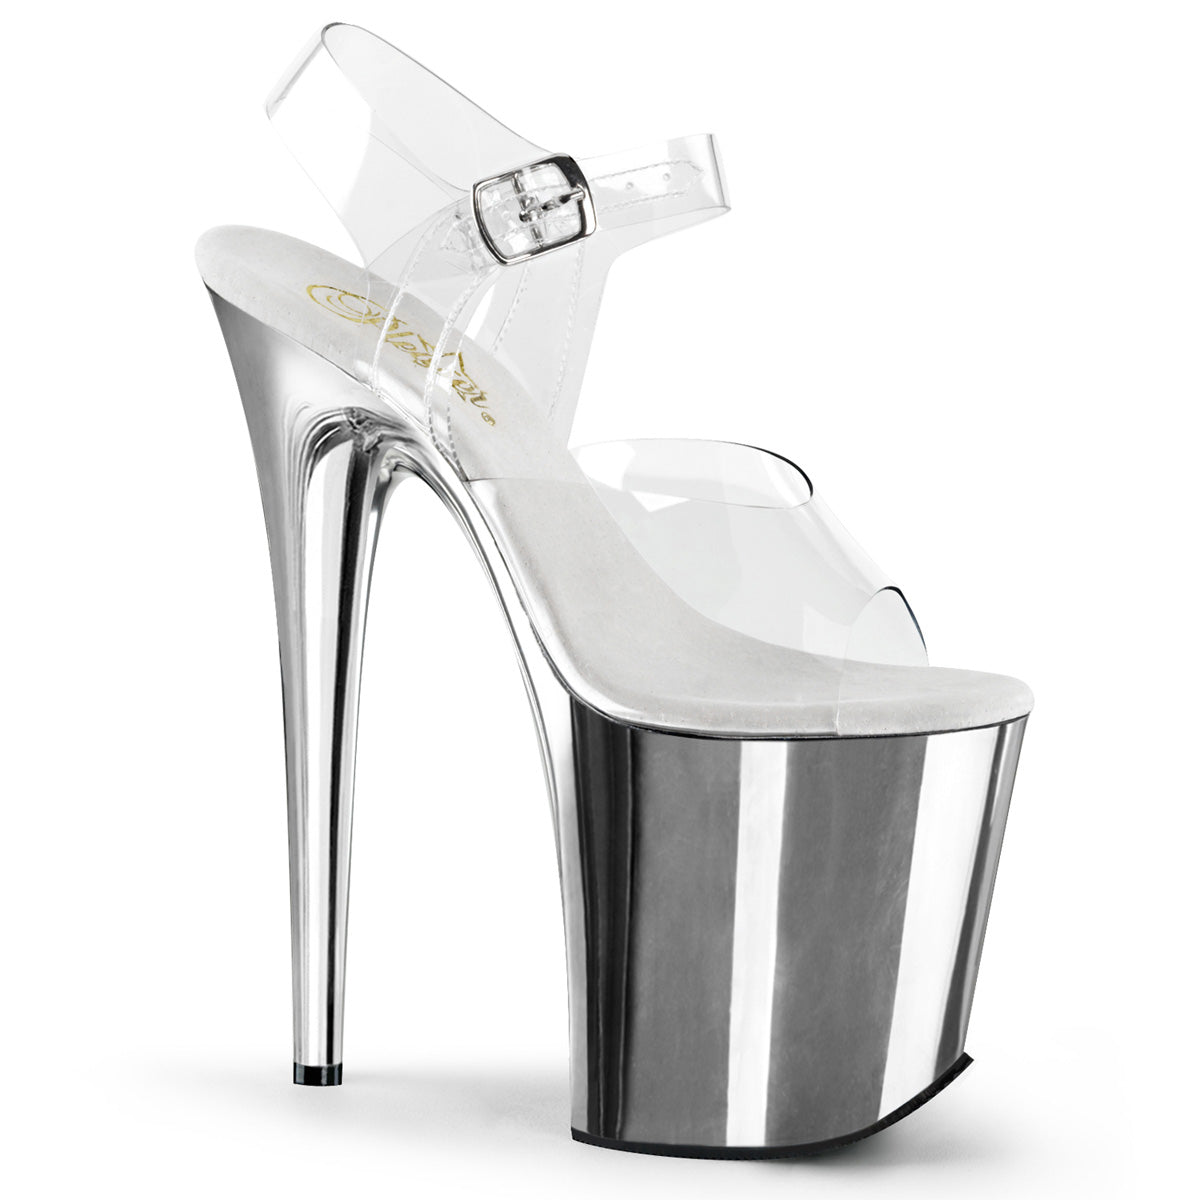 FLAMINGO-808 8" Heel ClearSilver Chrome Stripper Shoes